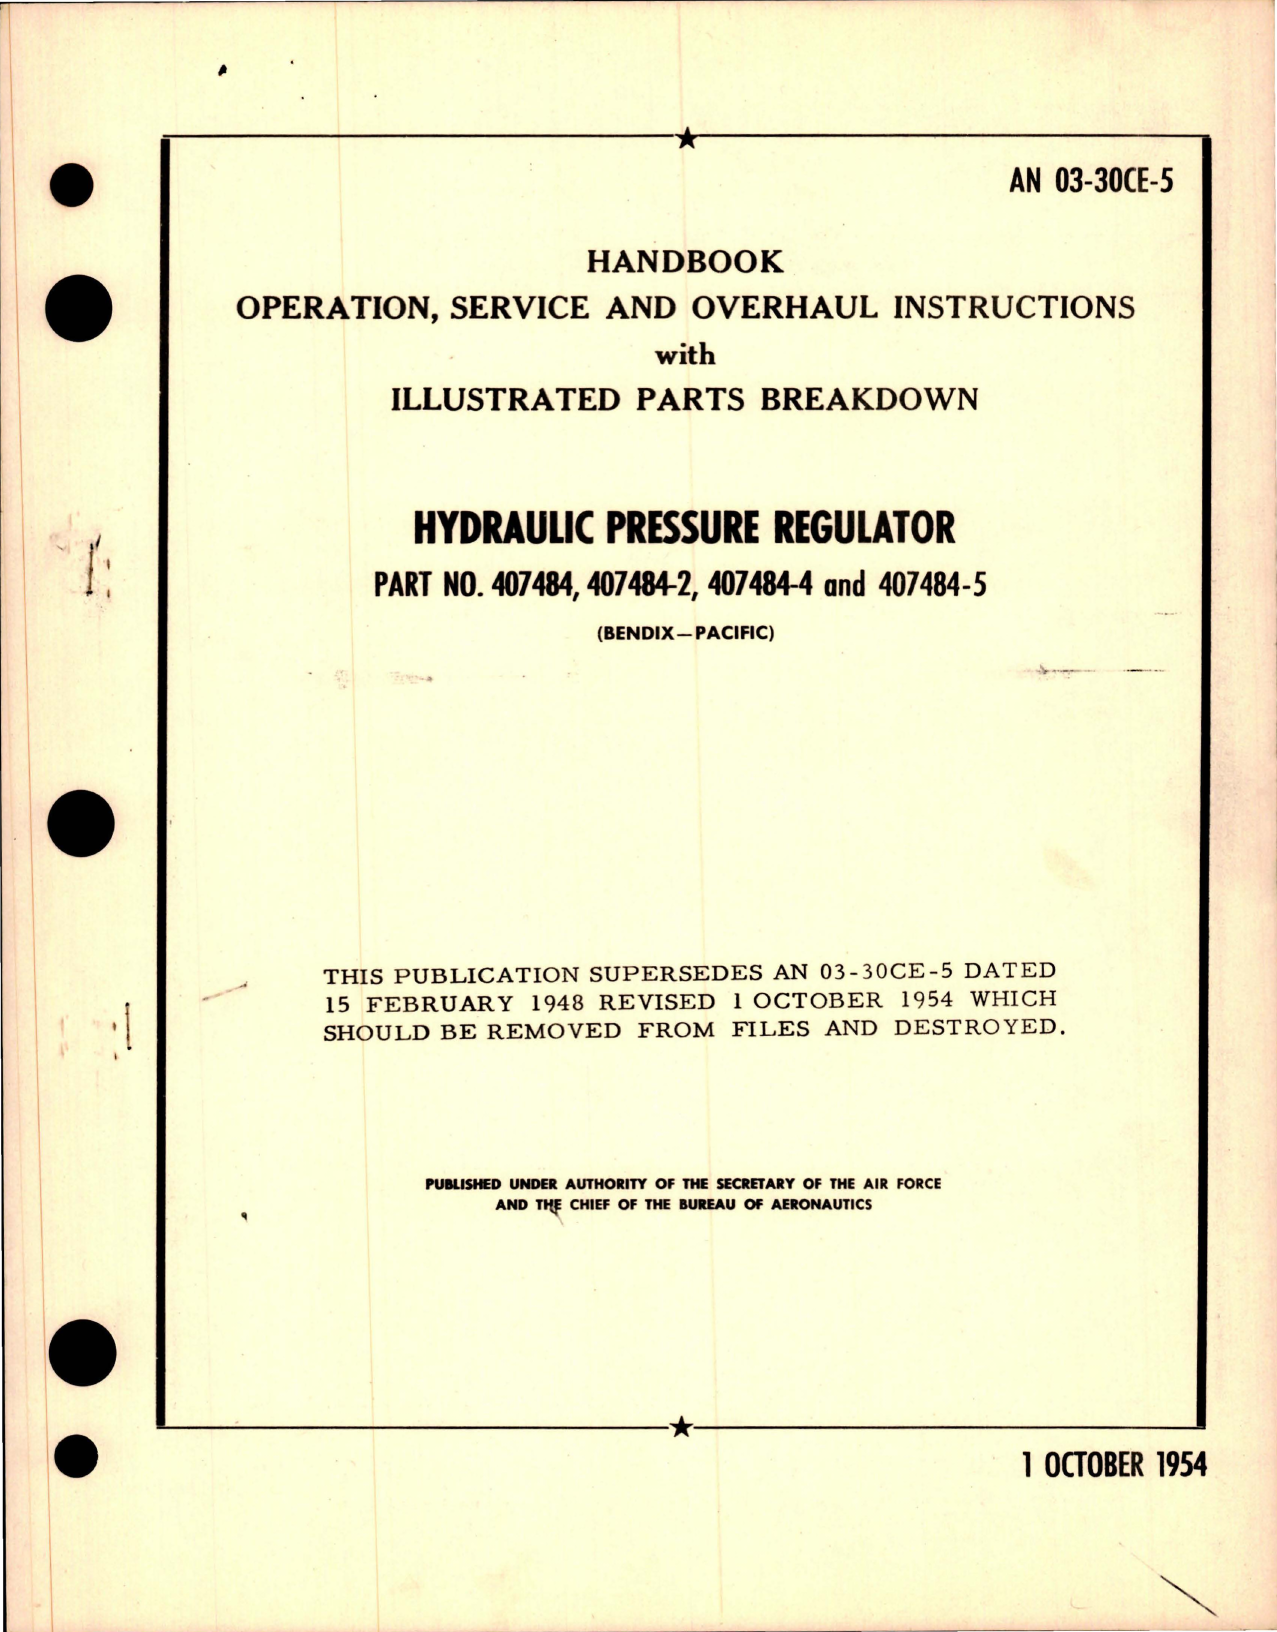 Sample page 1 from AirCorps Library document: Operation, Service, and Overhaul Instructions with Parts for Hydraulic Pressure Regulator - Part 407484 Series